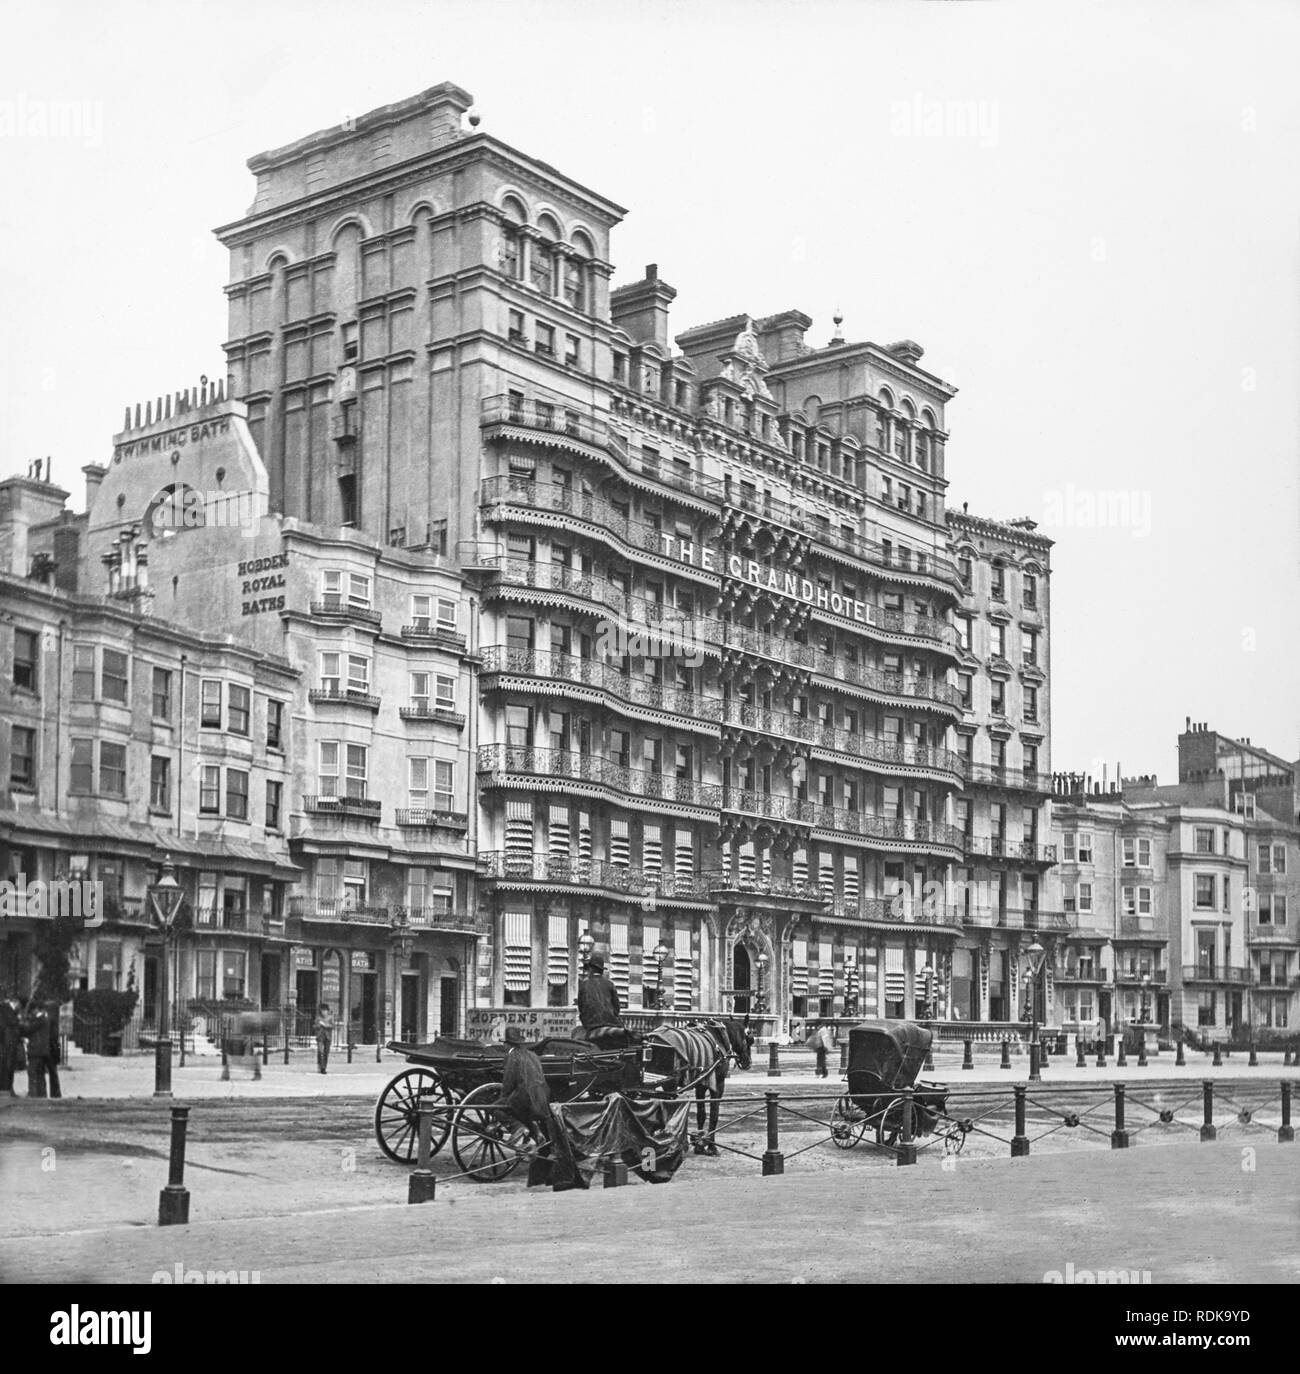 Late Victorian photograph showing The Grand Hotel in Brighton England, with the Hobden Royal Baths next to it. Men in horse drawn carriages waiting outside. Stock Photo